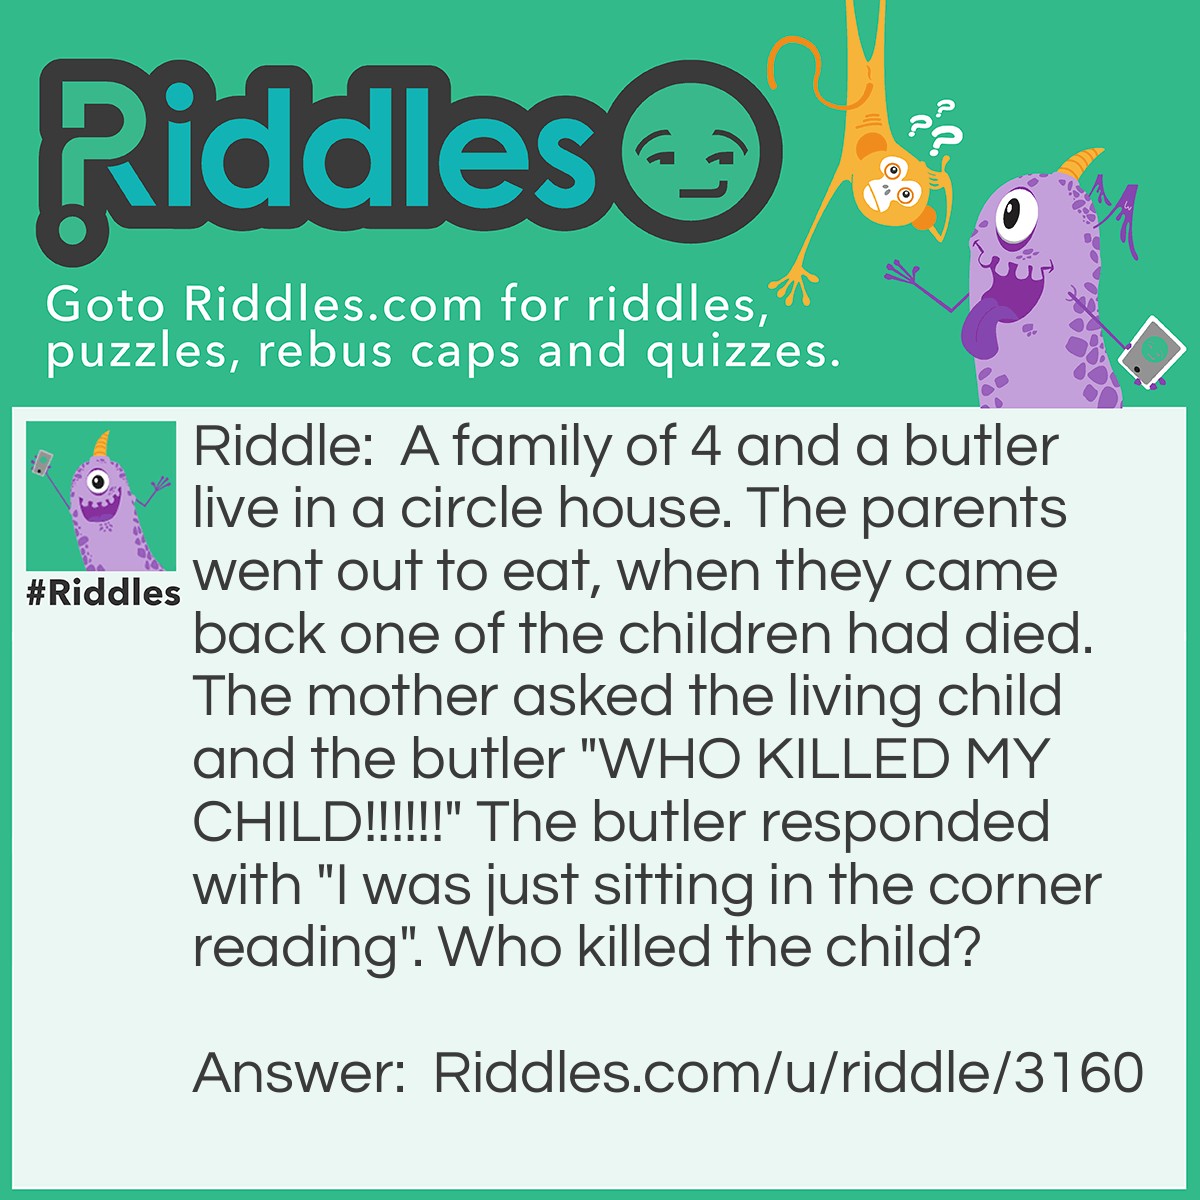 Riddle: A family of 4 and a butler live in a circle house. The parents went out to eat, when they came back one of the children had died. The mother asked the living child and the butler "WHO KILLED MY CHILD!!!!!!" The butler responded with "I was just sitting in the corner reading". Who killed the child? Answer: The butler because if they live in a circle house there are no corners.